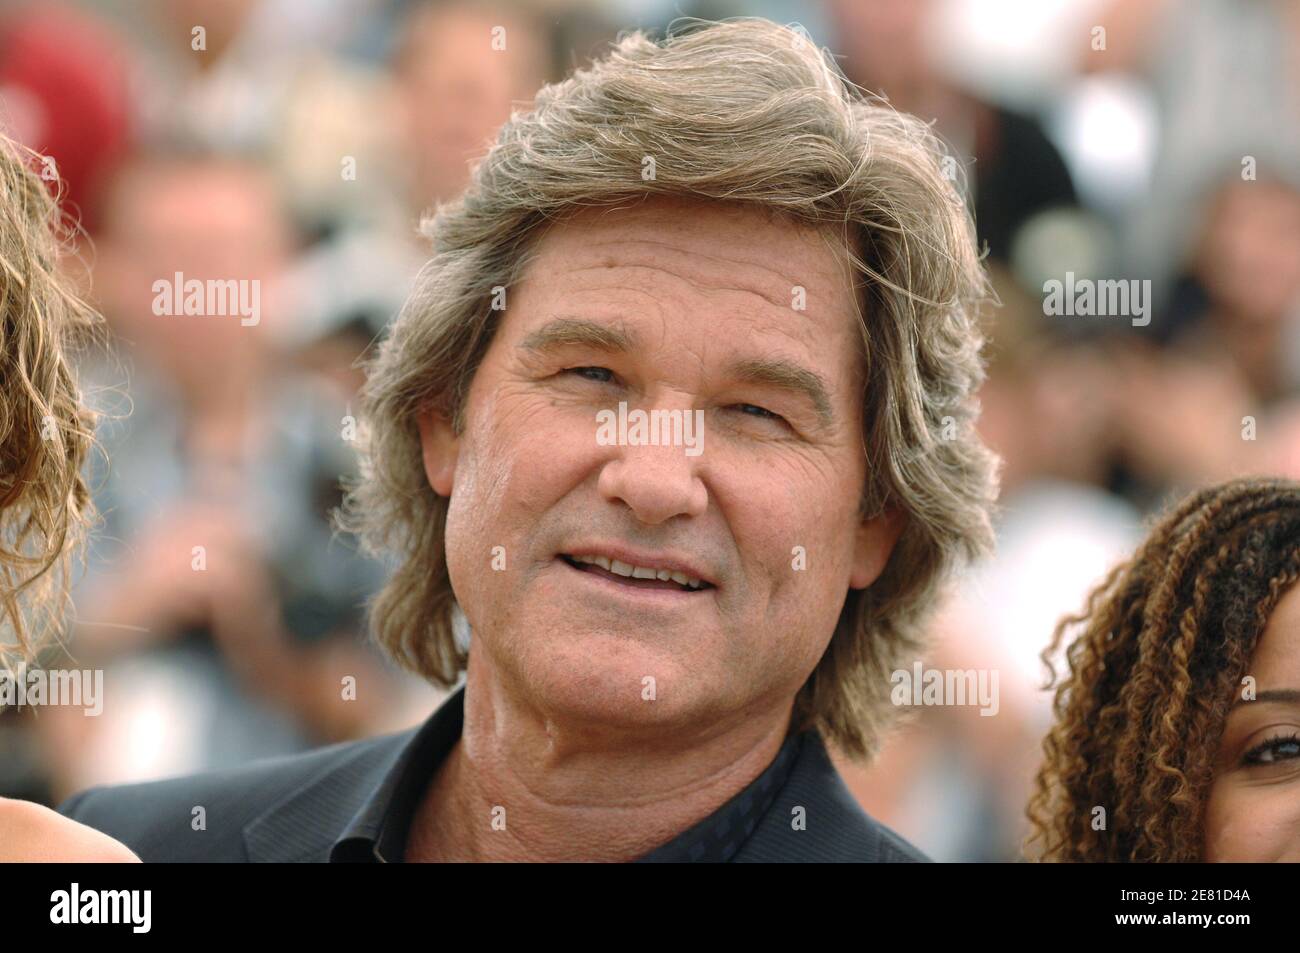 US actor Kurt Russell attends a photocall promoting the film 'Death Proof' at the Palais des Festivals during the 60th International Cannes Film Festival on May 22, 2007 in Cannes, France. Photo by Hahn-Nebinger-Orban/ABACAPRESS.COM Stock Photo